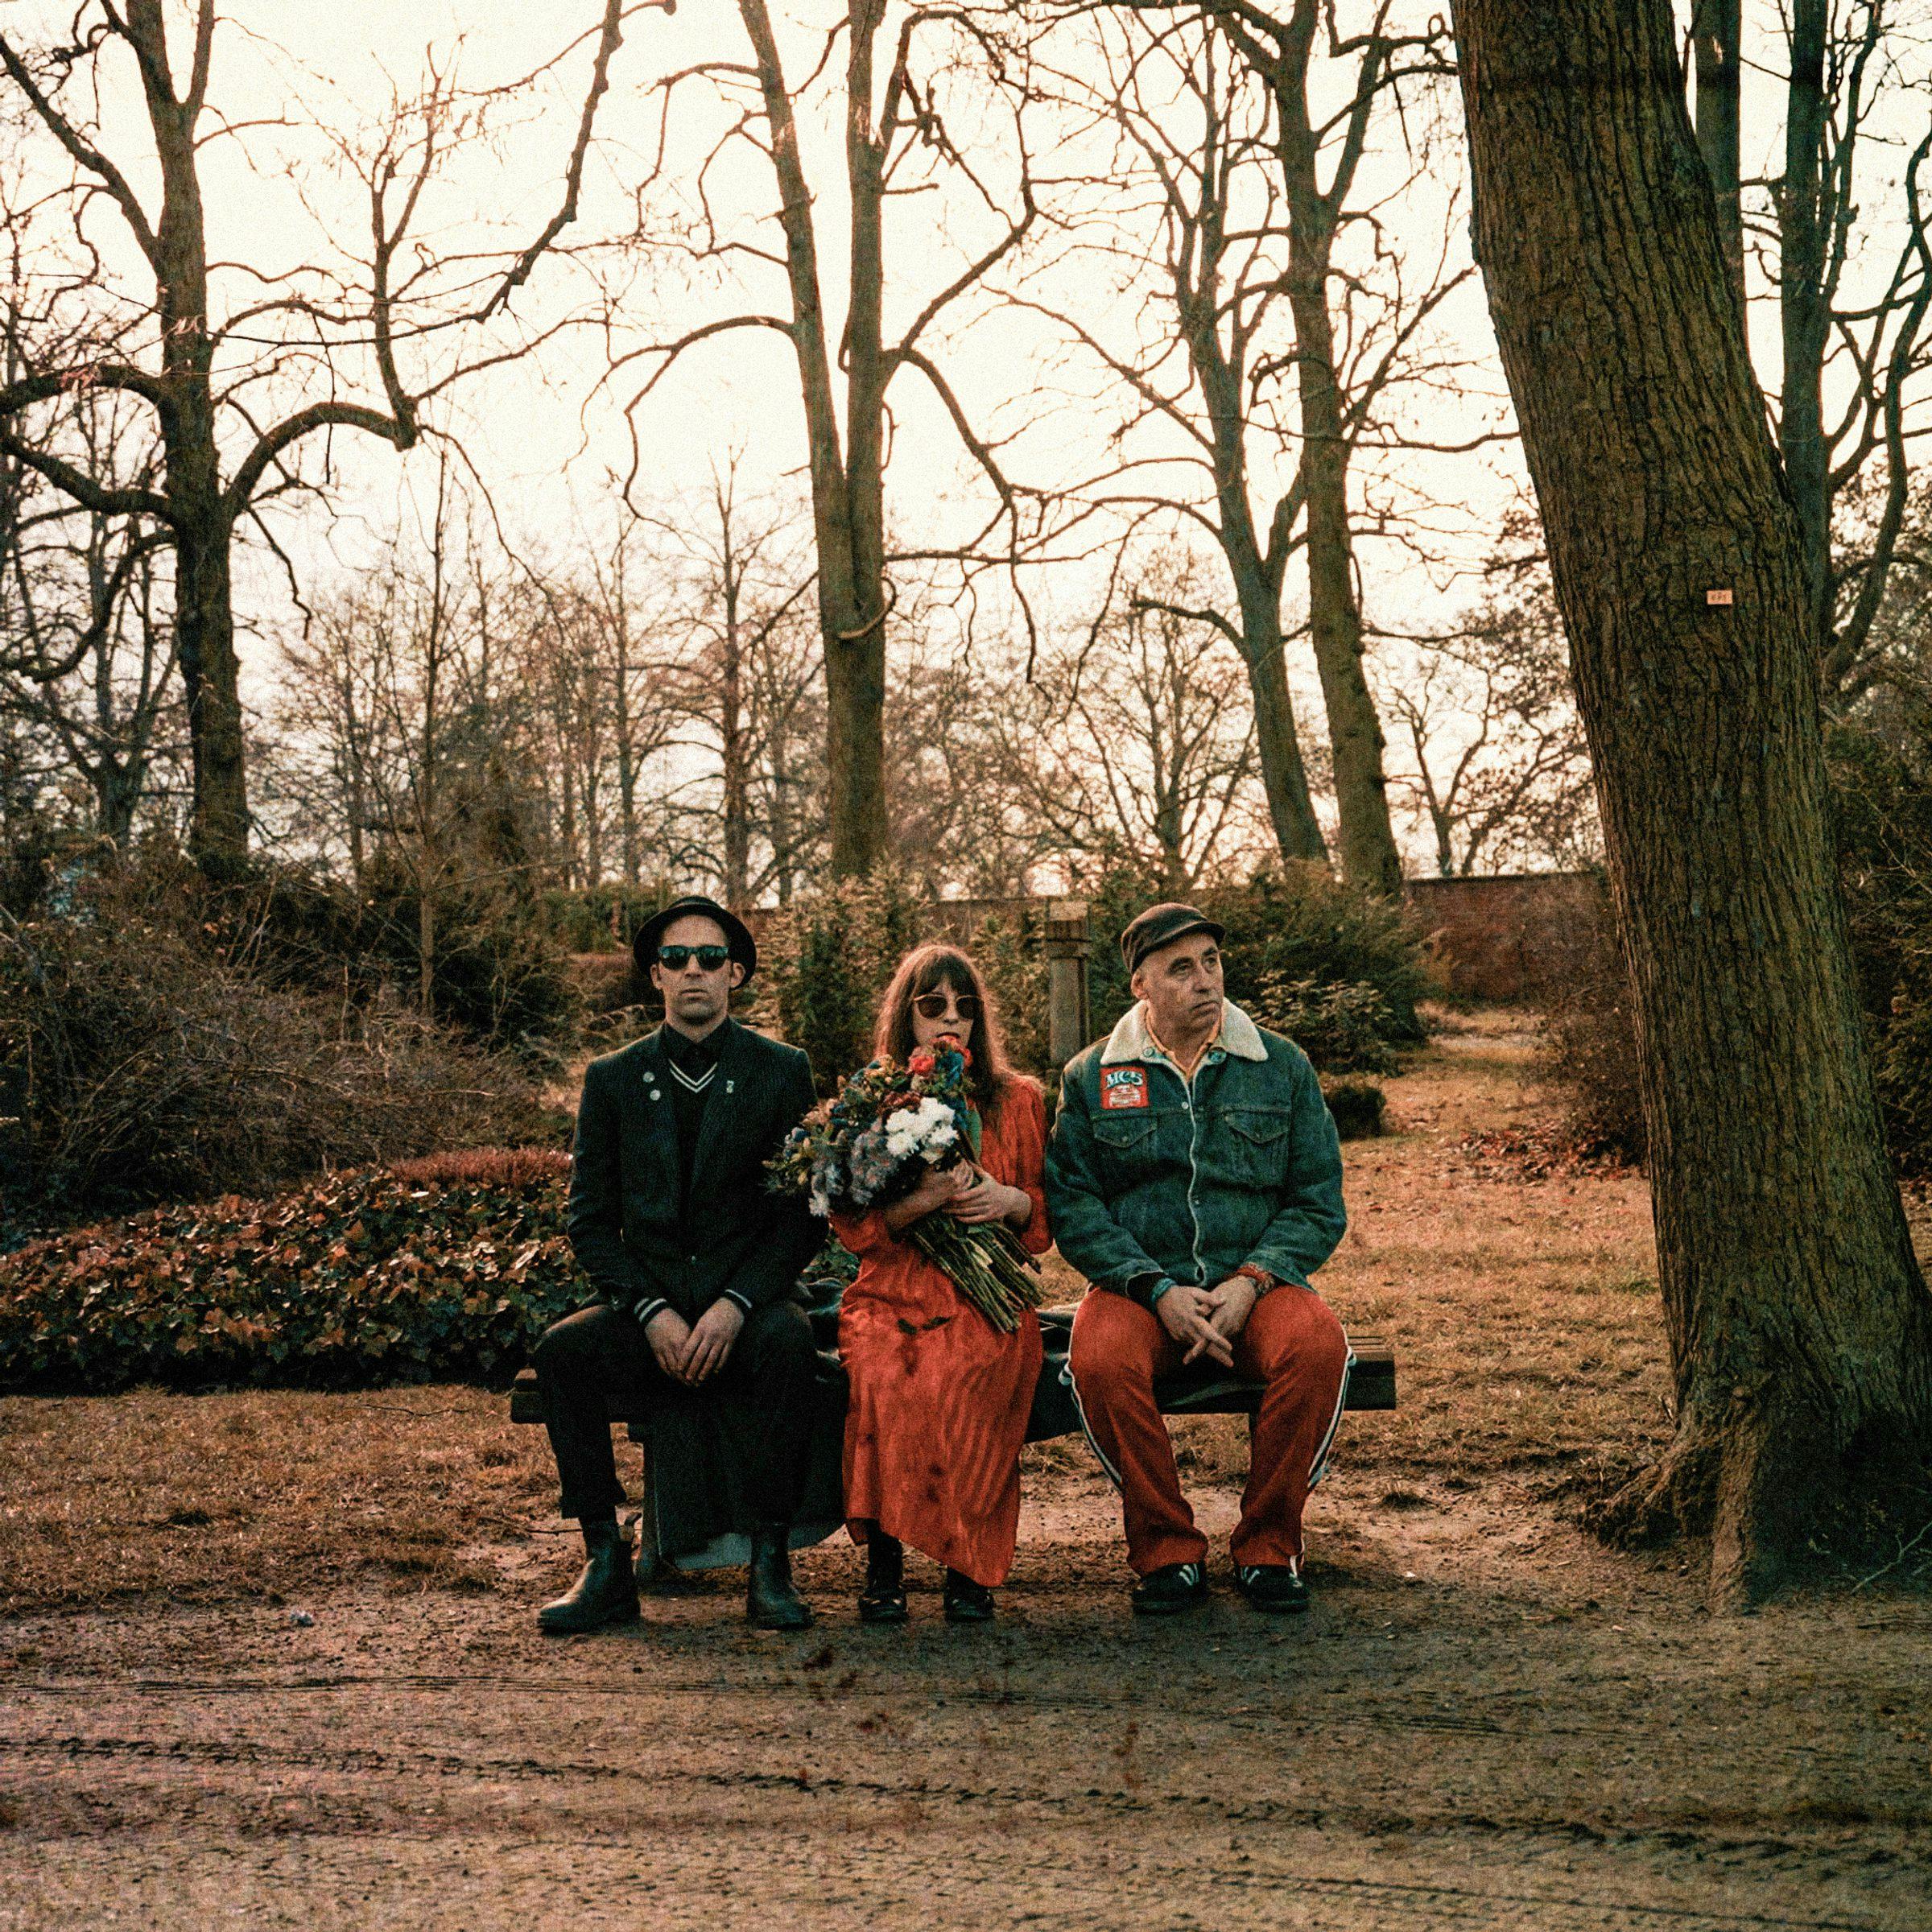 The three band members are sitting on a bench in an autumnal park wearing sunglasses. The singer is holding a bouquet of flowers in her hand.